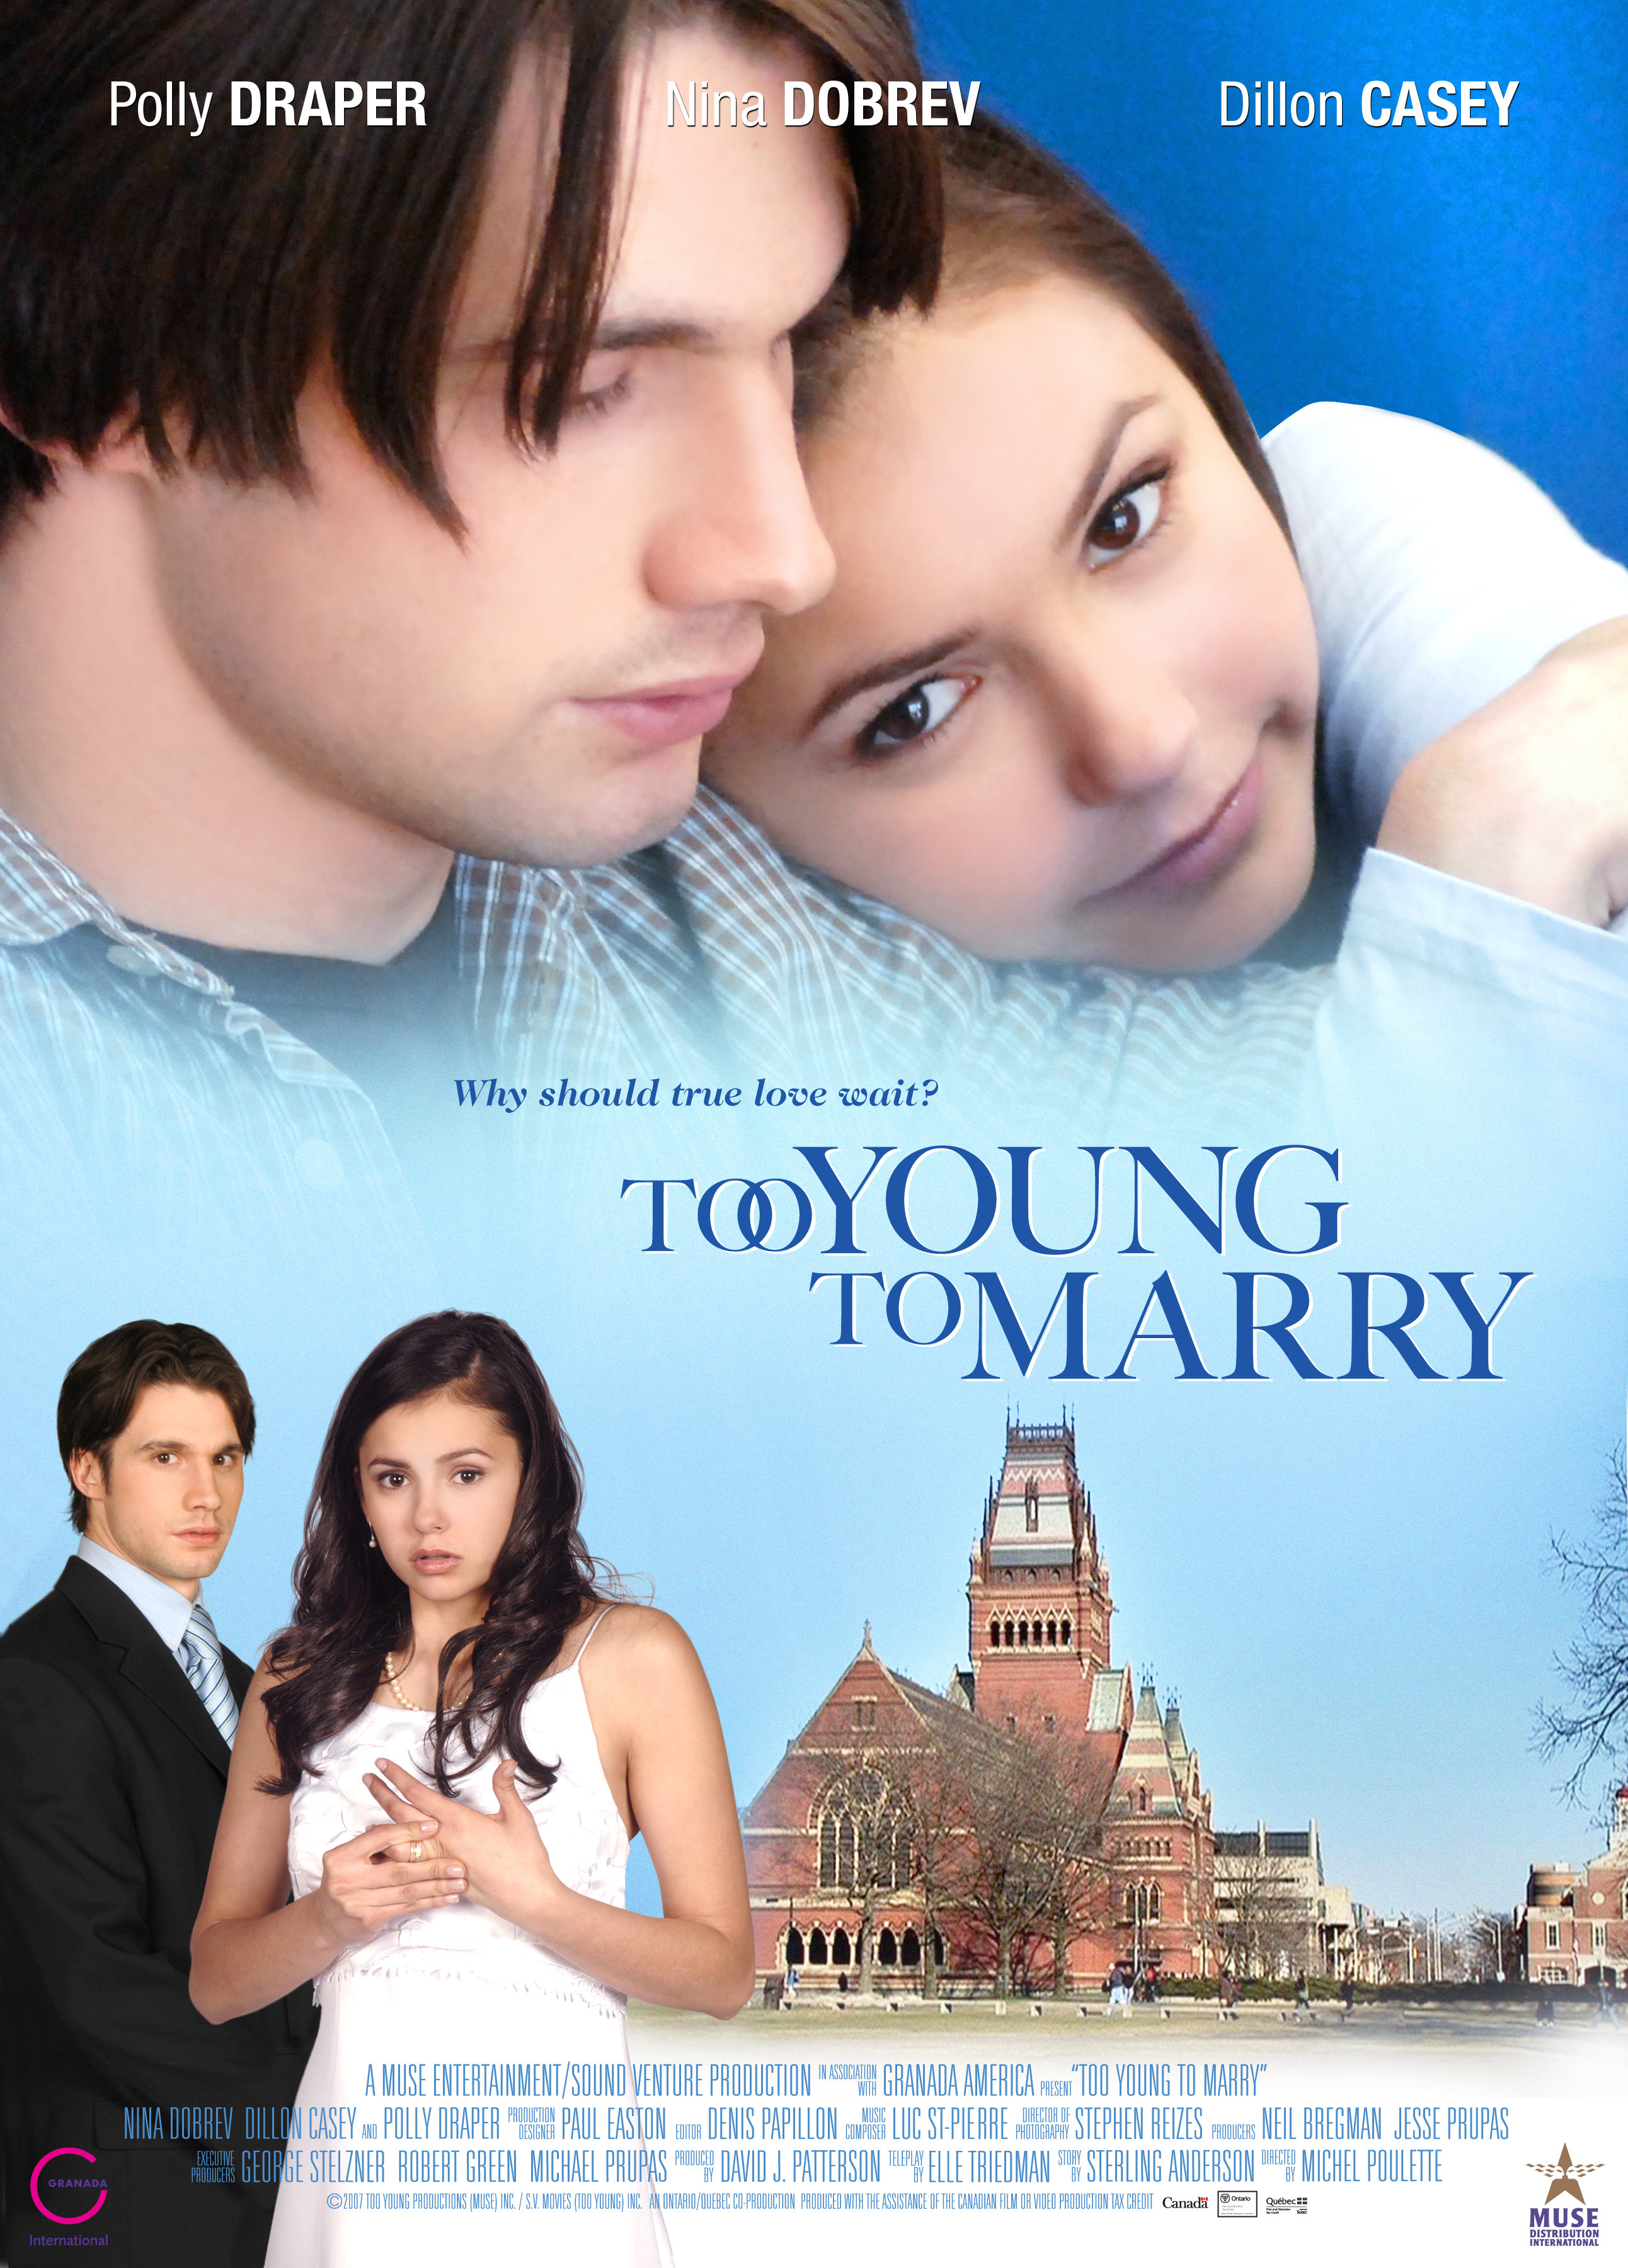 Too Young to Marry (2007) starring Nina Dobrev on DVD on DVD